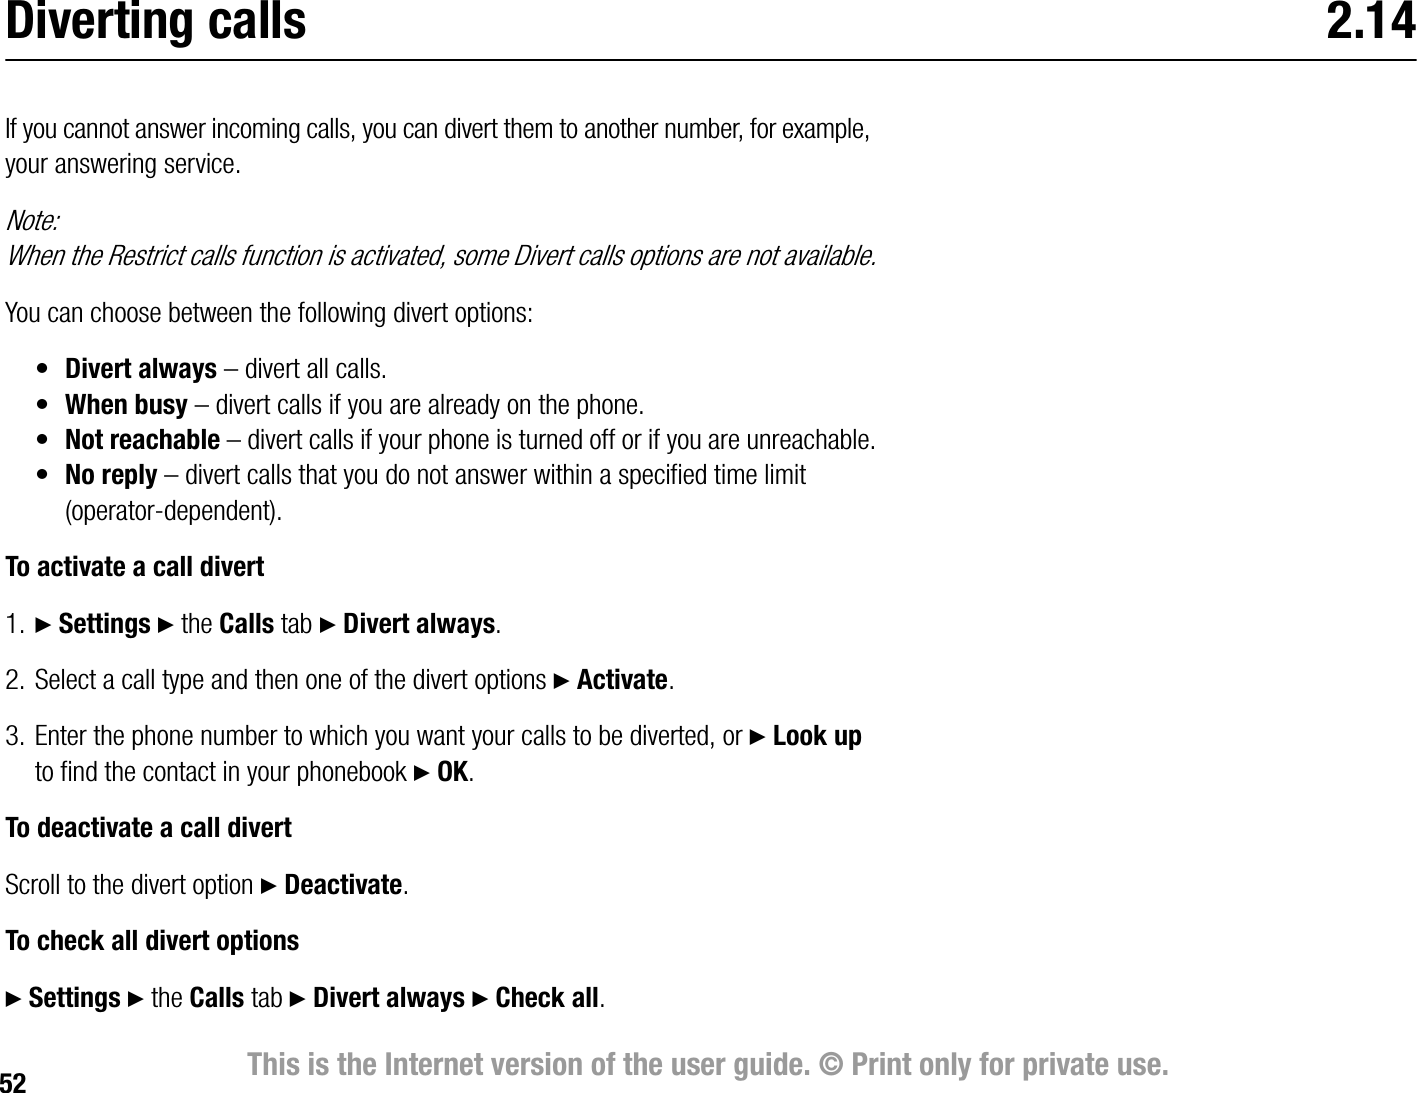 52 This is the Internet version of the user guide. © Print only for private use.Diverting calls 2.14If you cannot answer incoming calls, you can divert them to another number, for example, your answering service.Note:When the Restrict calls function is activated, some Divert calls options are not available.You can choose between the following divert options:•Divert always – divert all calls.•When busy – divert calls if you are already on the phone.•Not reachable – divert calls if your phone is turned off or if you are unreachable.•No reply – divert calls that you do not answer within a specified time limit (operatordependent).To activate a call divert1. } Settings } the Calls tab } Divert always.2. Select a call type and then one of the divert options } Activate.3. Enter the phone number to which you want your calls to be diverted, or } Look up to find the contact in your phonebook } OK. To deactivate a call divertScroll to the divert option } Deactivate.To check all divert options} Settings } the Calls tab } Divert always } Check all.